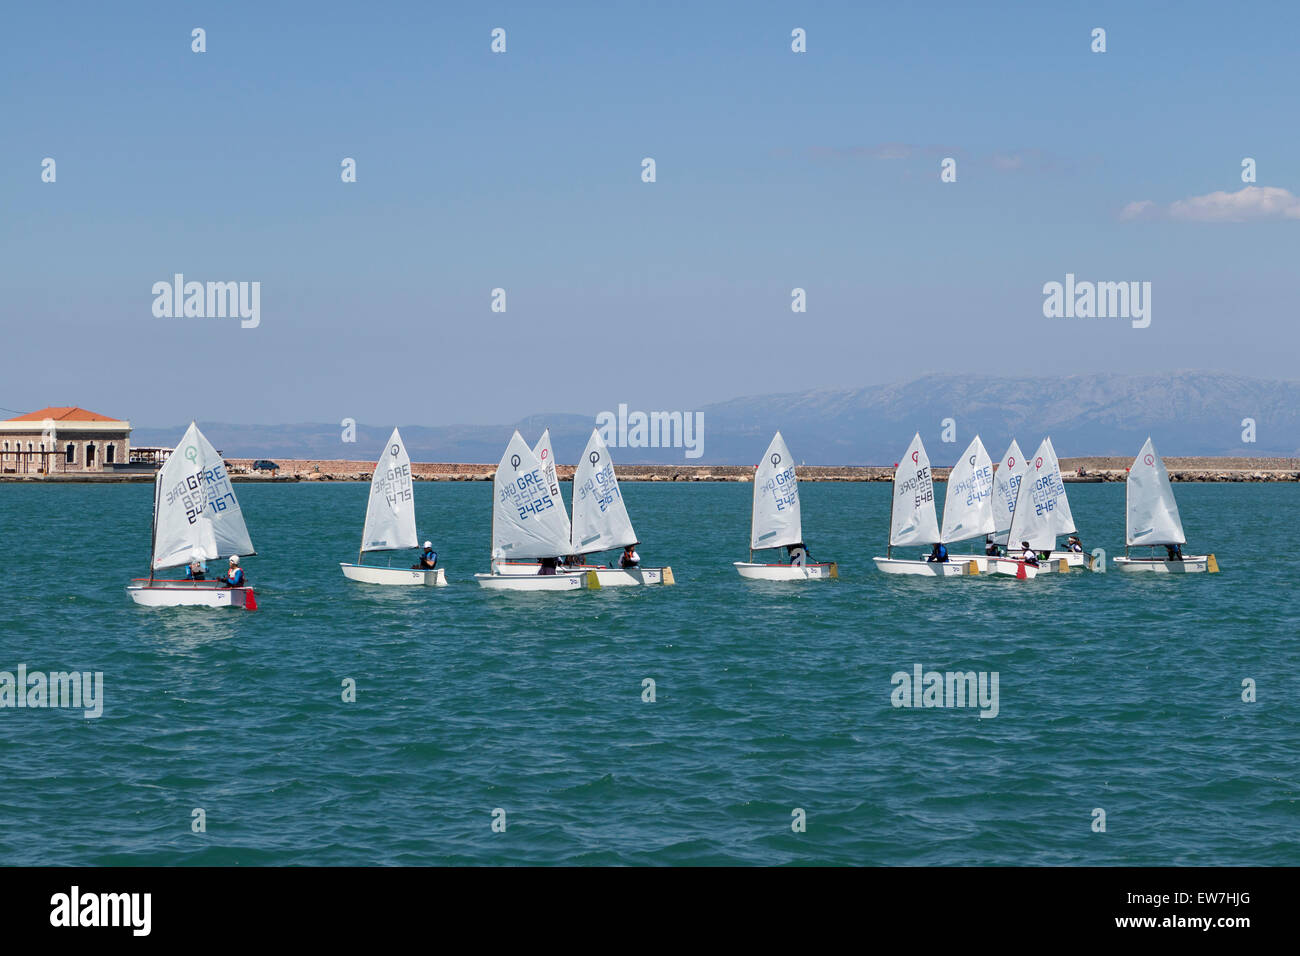 Sailing lessons for children in the bay of the city of Chios, on the isle of Chios, Greece Stock Photo